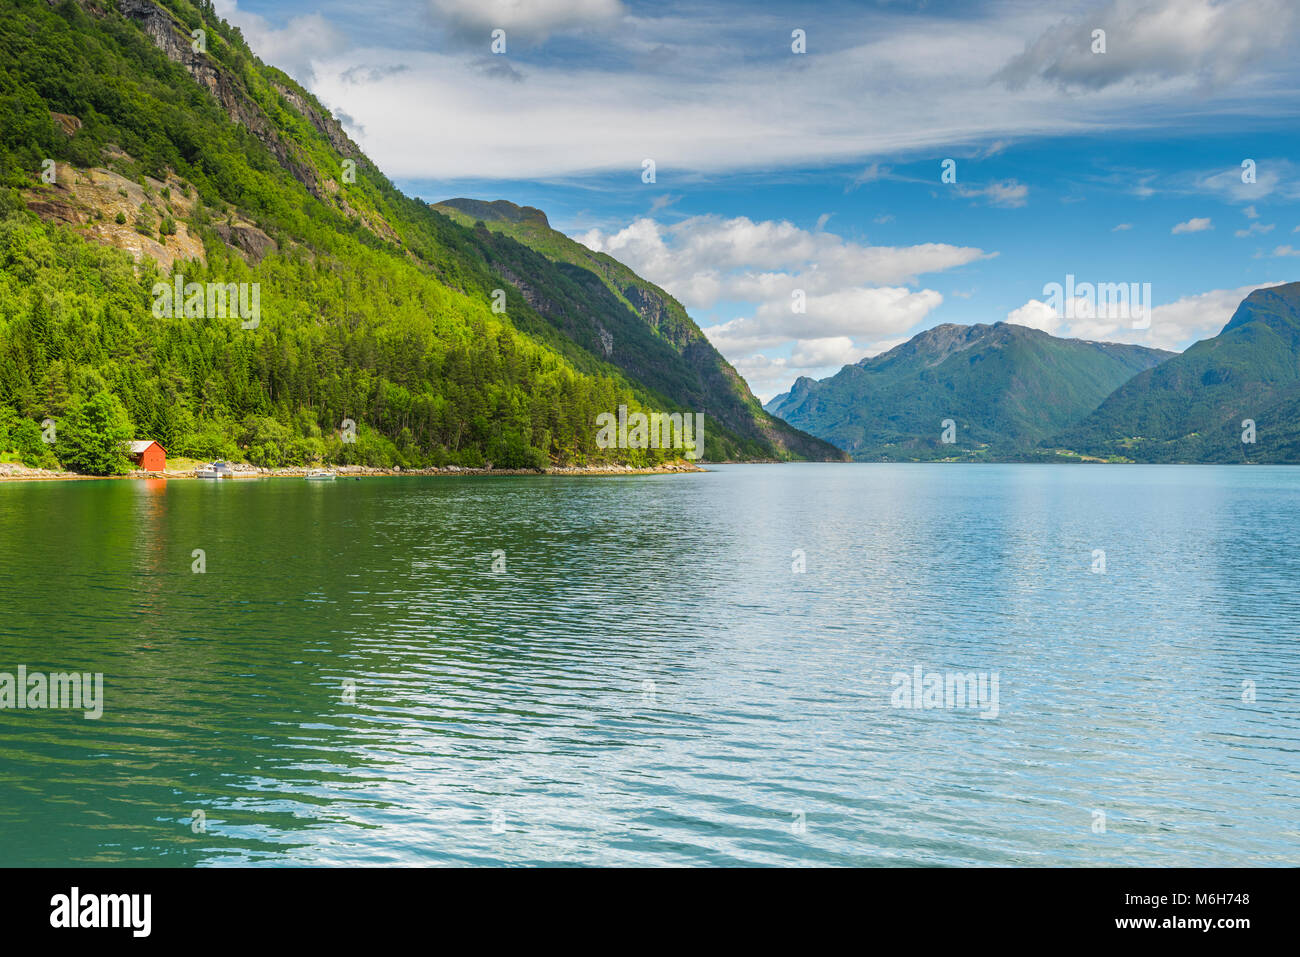 small red hut at the shore of the fjord, Norway, Lustrafjorden, Sognefjorden Stock Photo